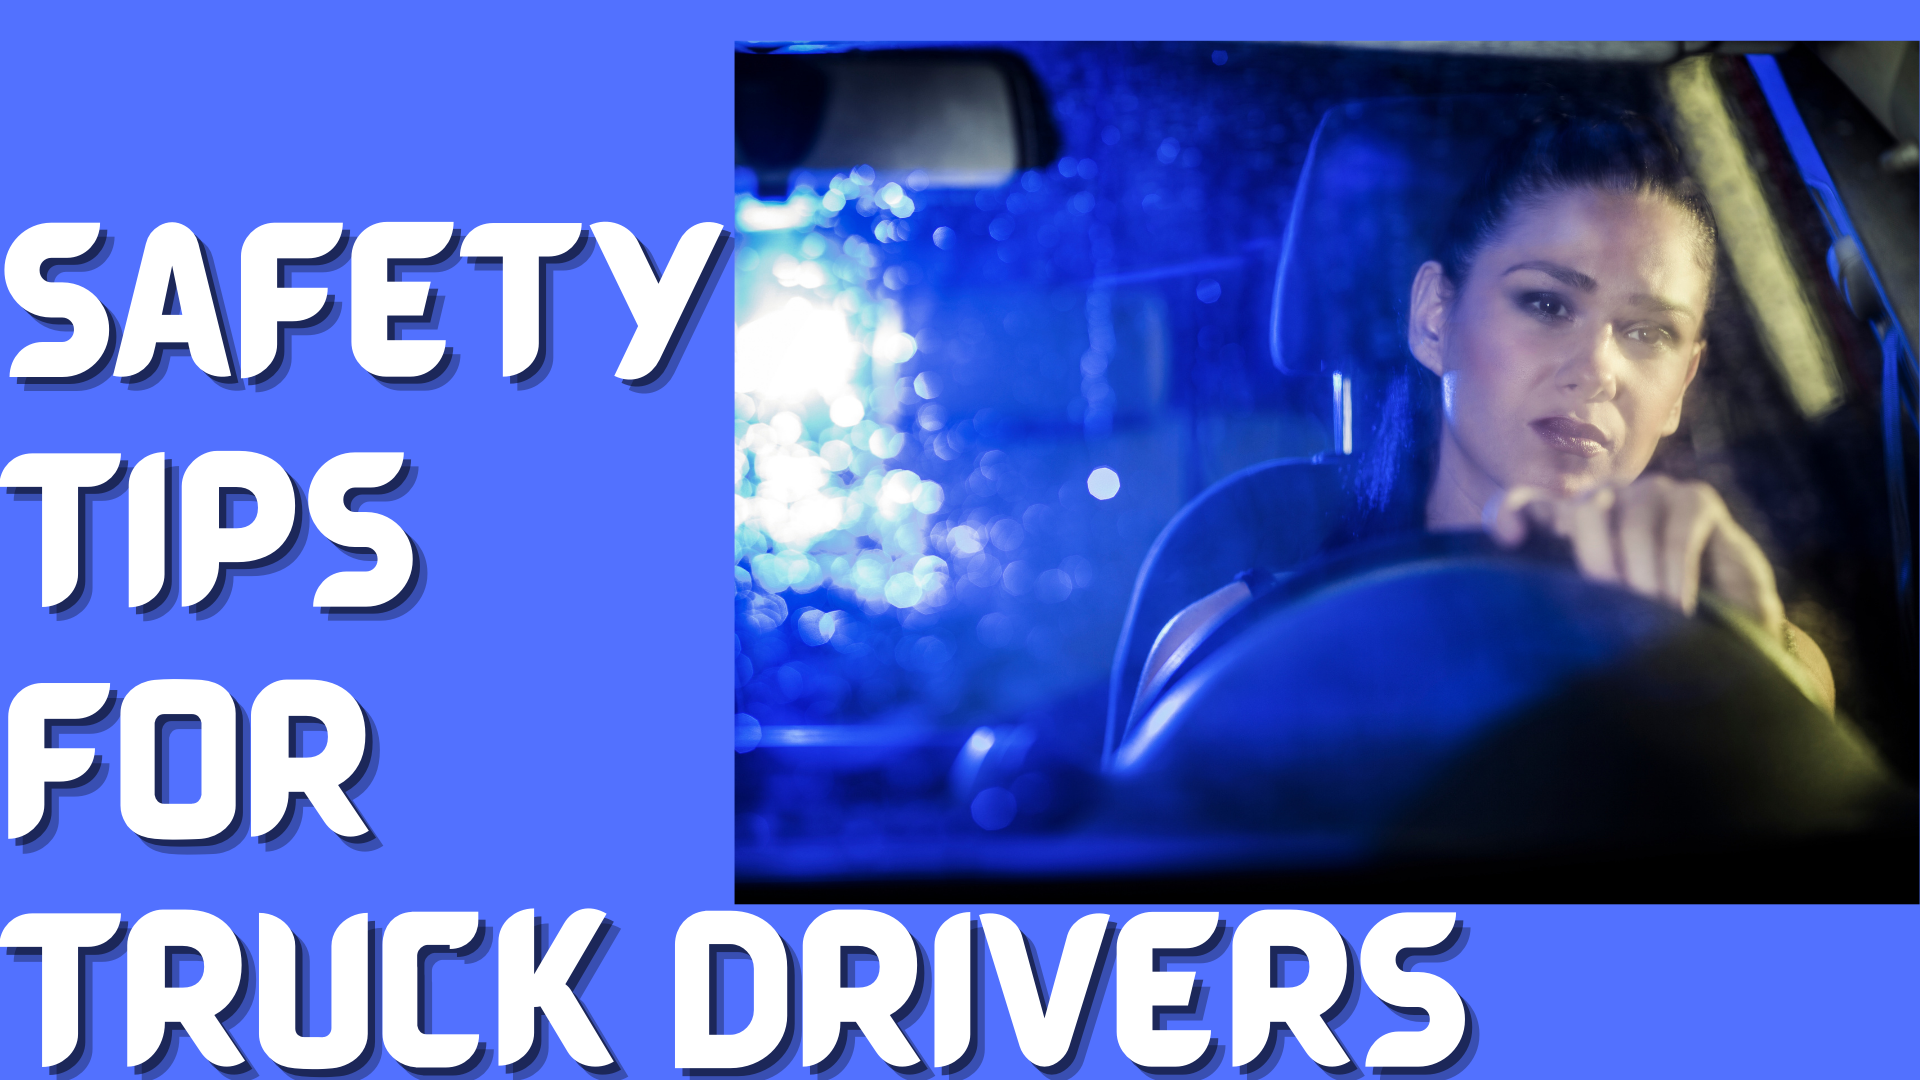 Important Safety Tips For Truck Drivers